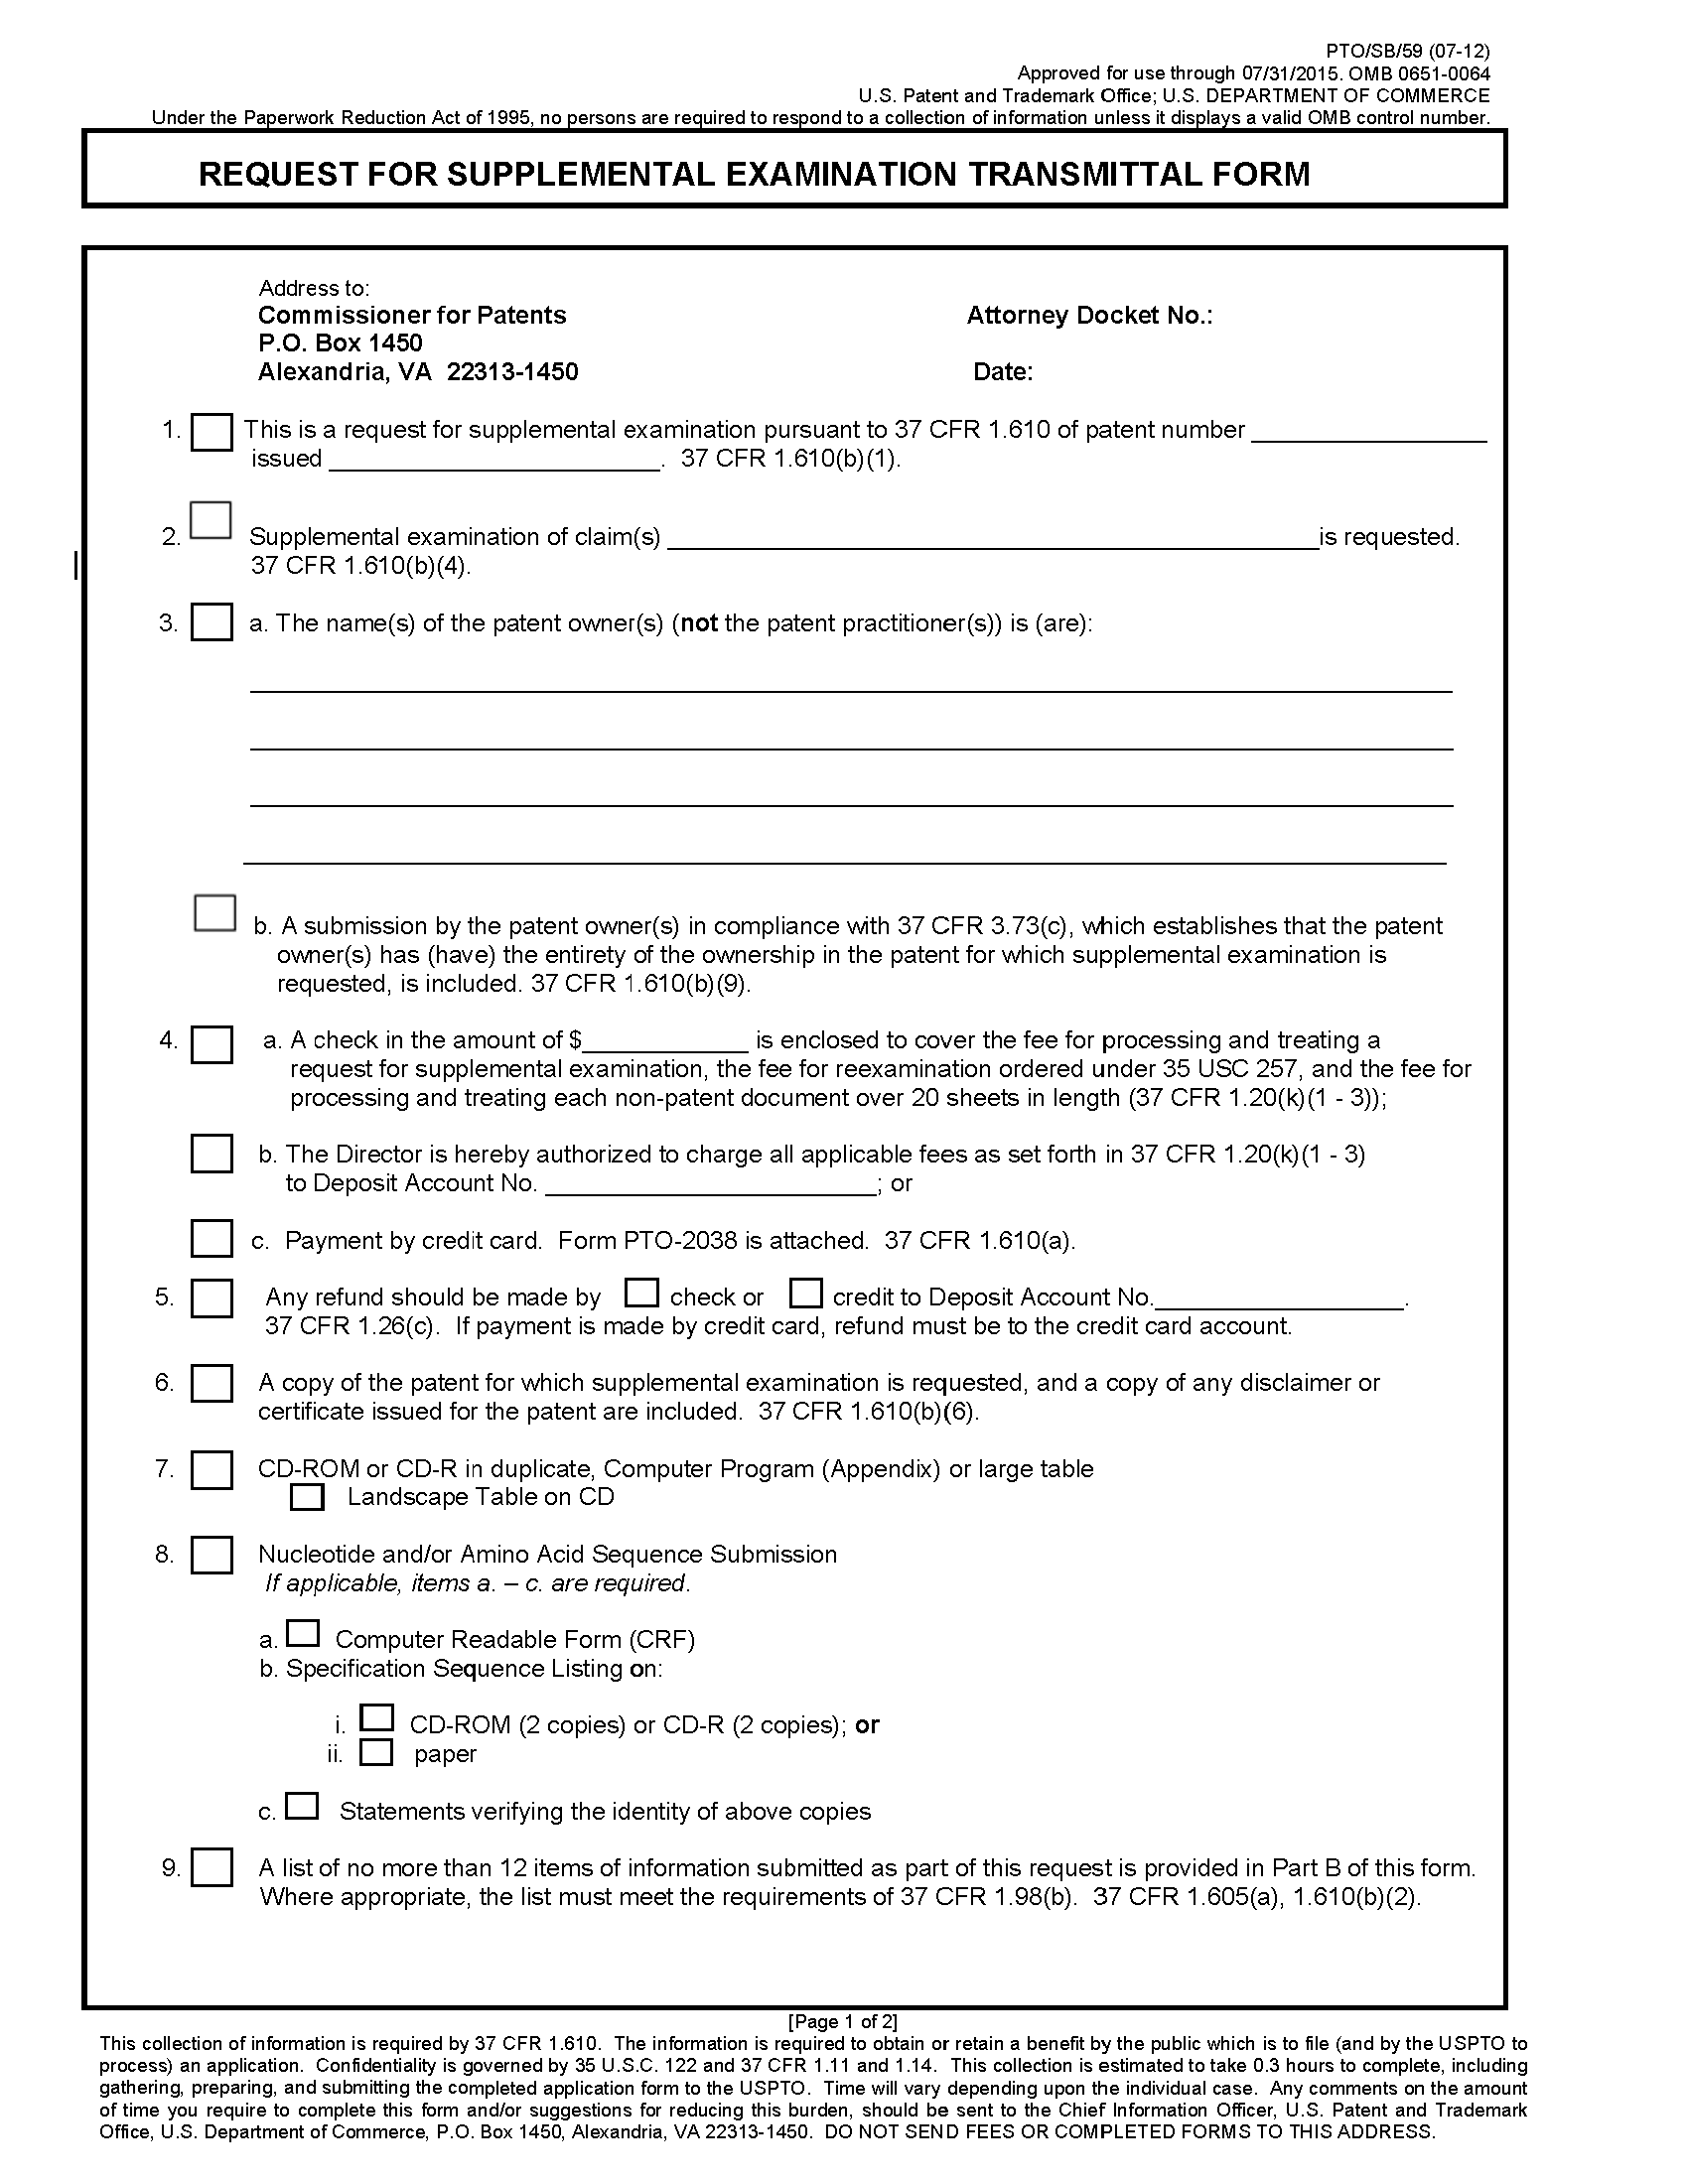 Form PTO/SB/59. Page 1 of 2. Request for Supplemantal Examination Transmittal Form.